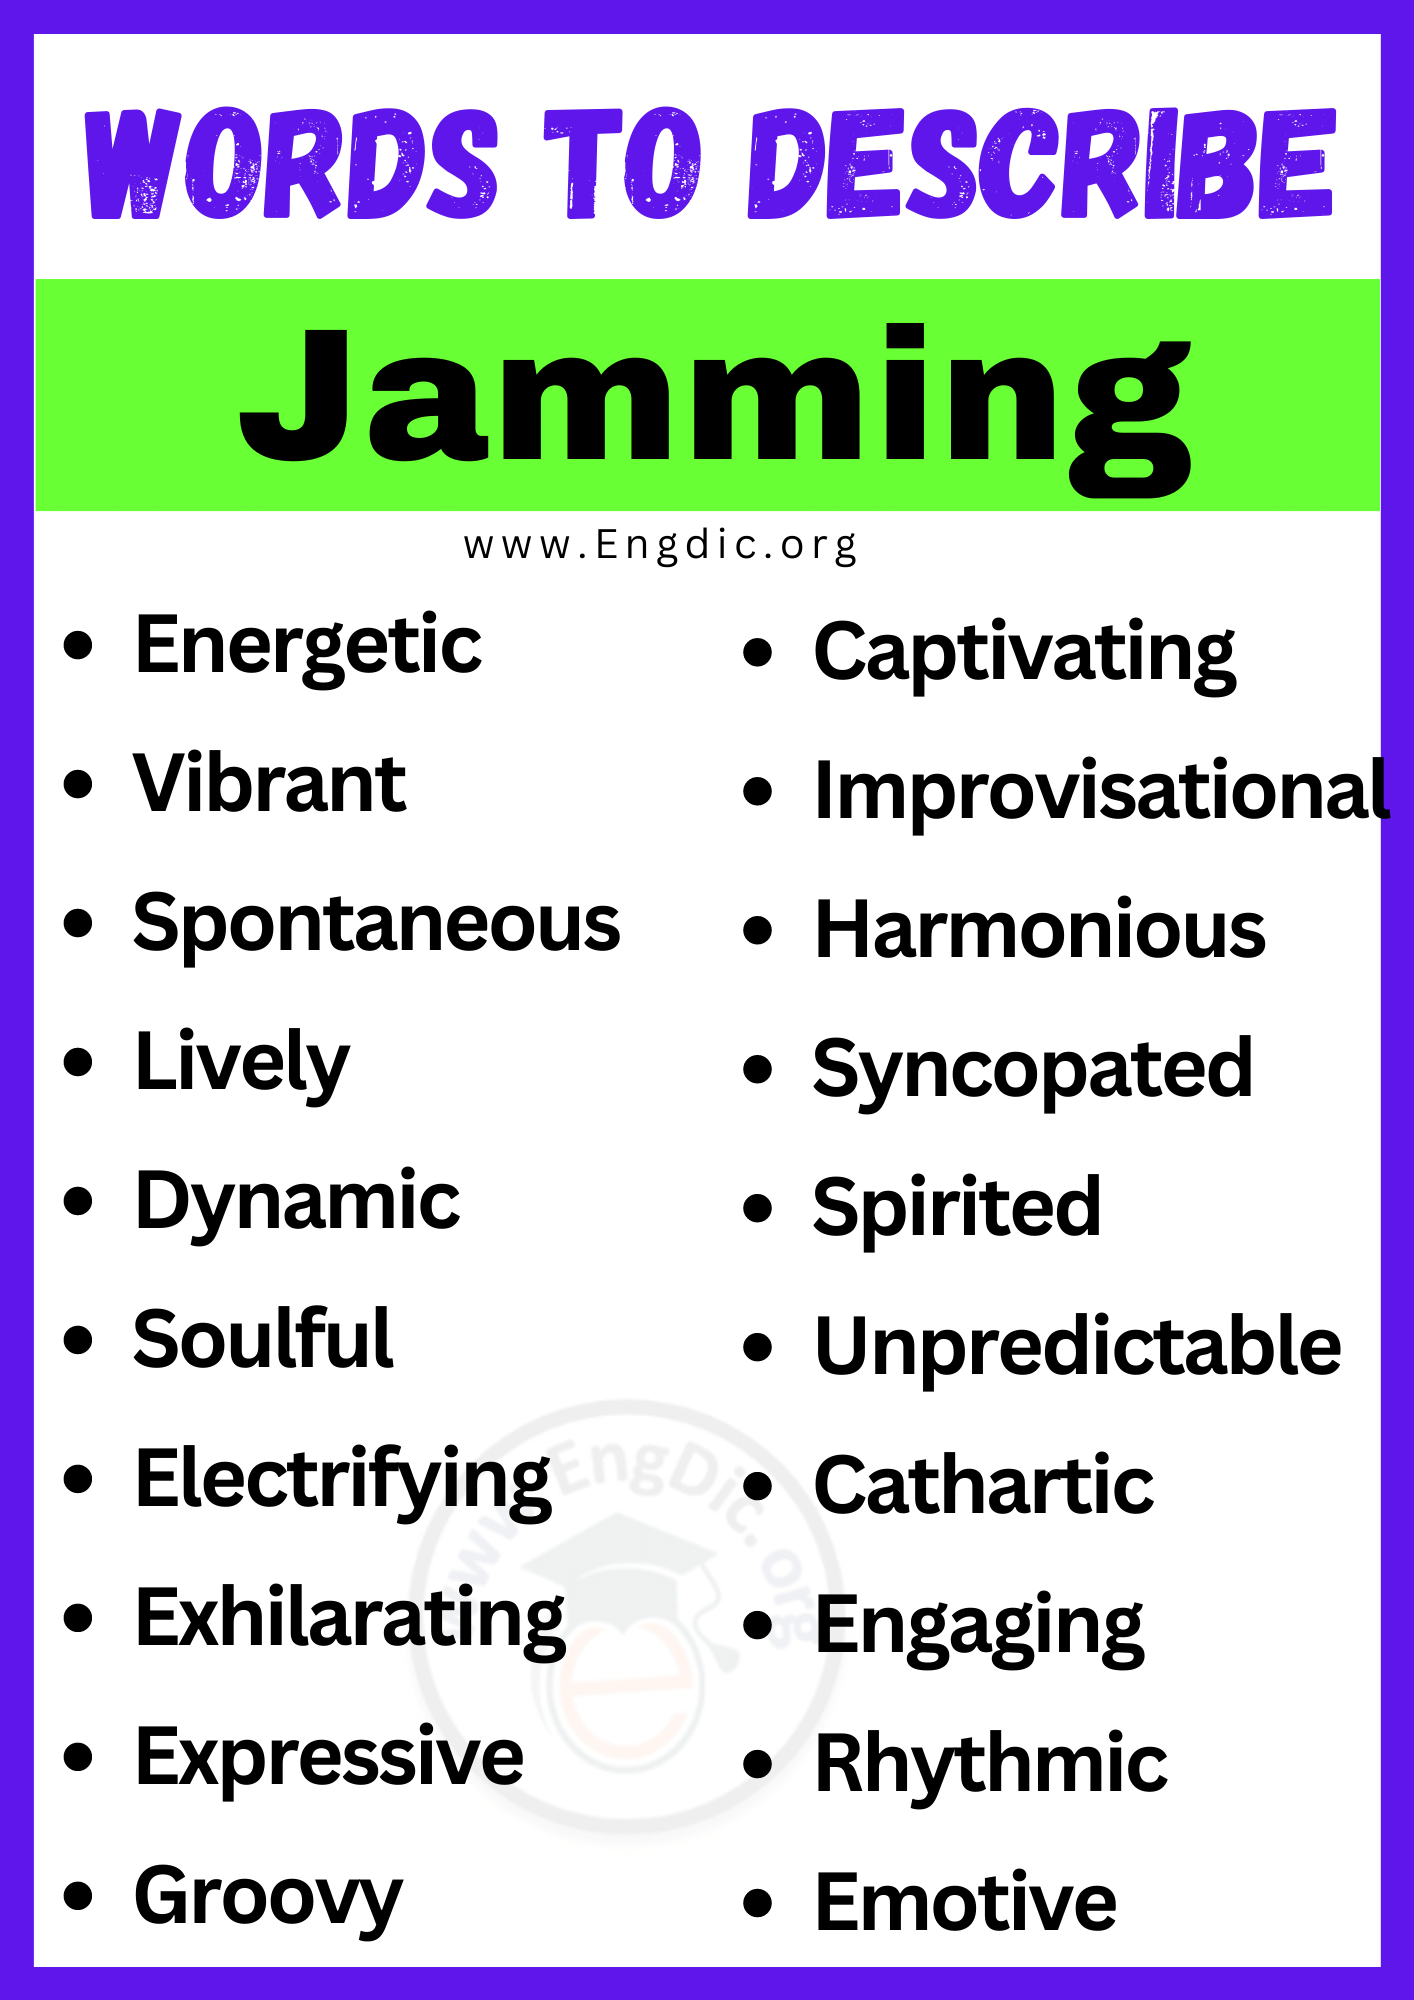 Words to Describe Jamming